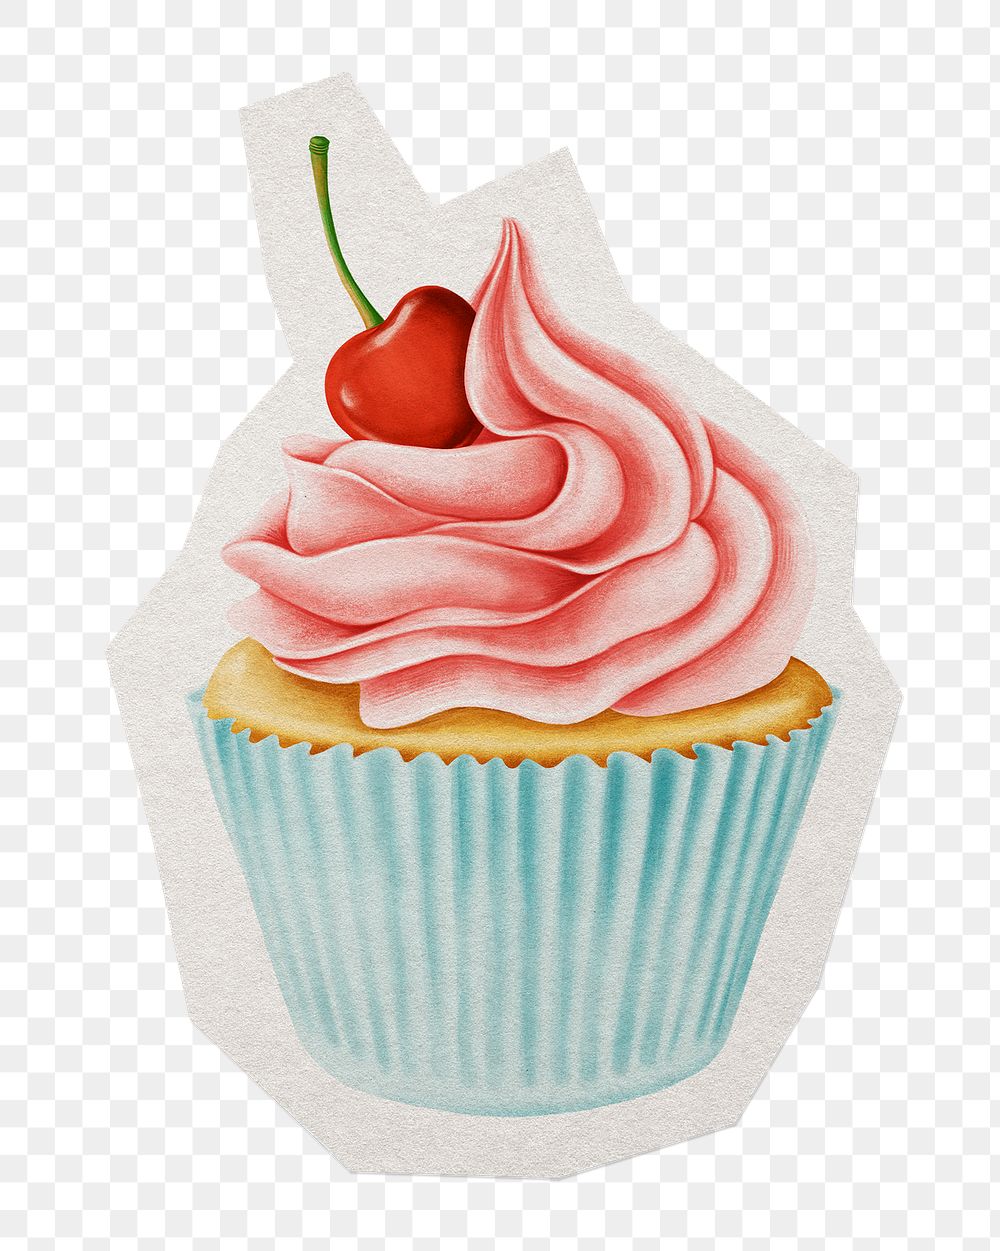 Cherry cupcake png bakery sticker, paper cut on transparent background